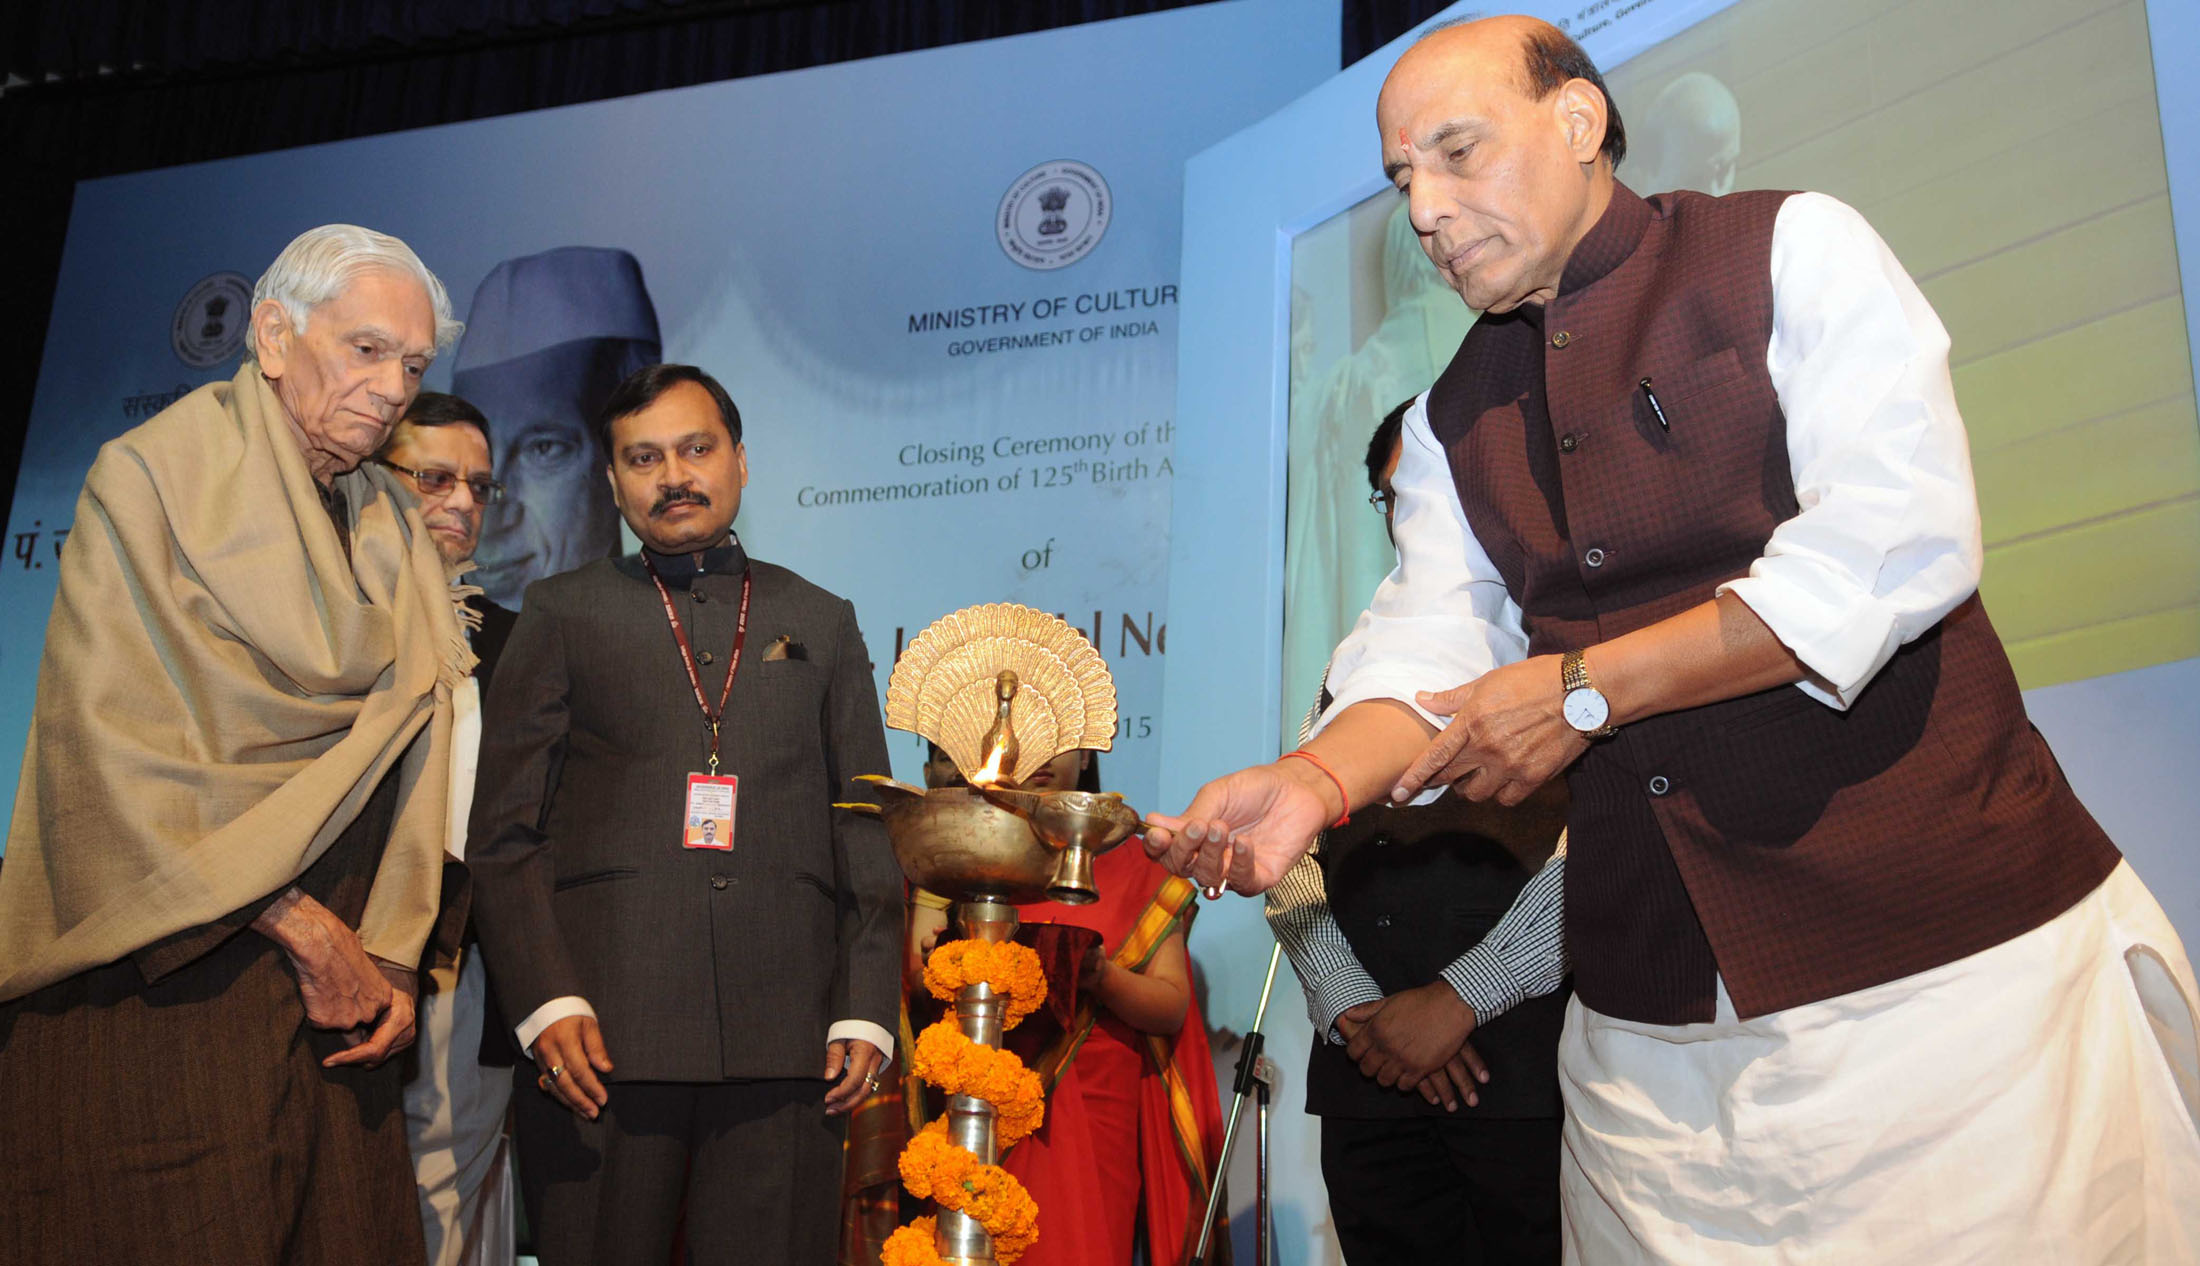 The Union Home Minister, Shri Rajnath Singh lighting the lamp at the function to commemorate the closing ceremony of 125th Birth Anniversary of the former Prime Minister, Pandit Jawaharlal Nehru, in New Delhi on November 14, 2015.